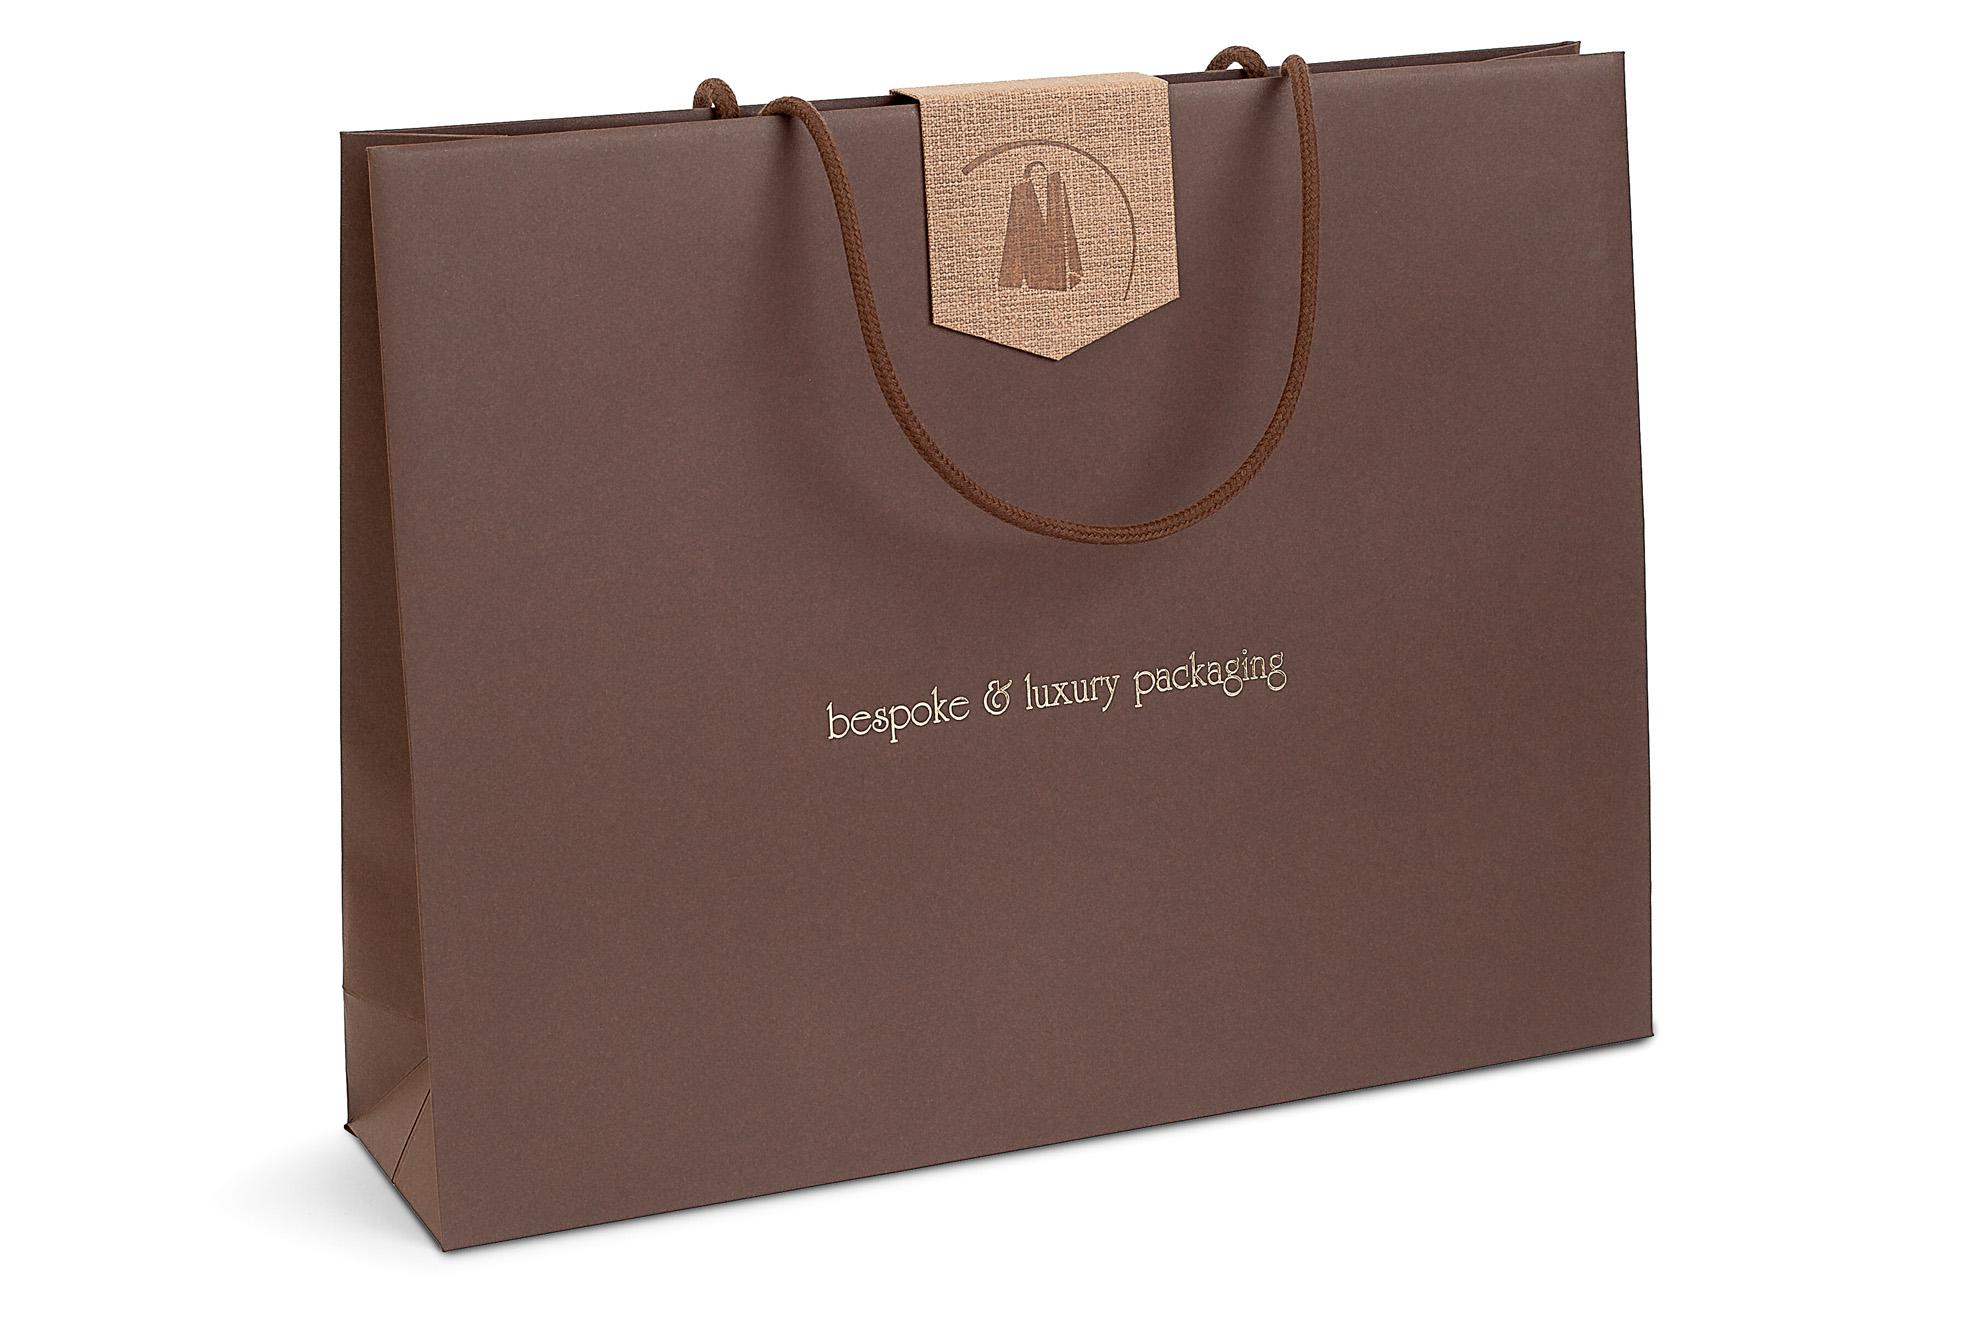 Premium Vector  Go shop. shopping bags made of paper or cardboard